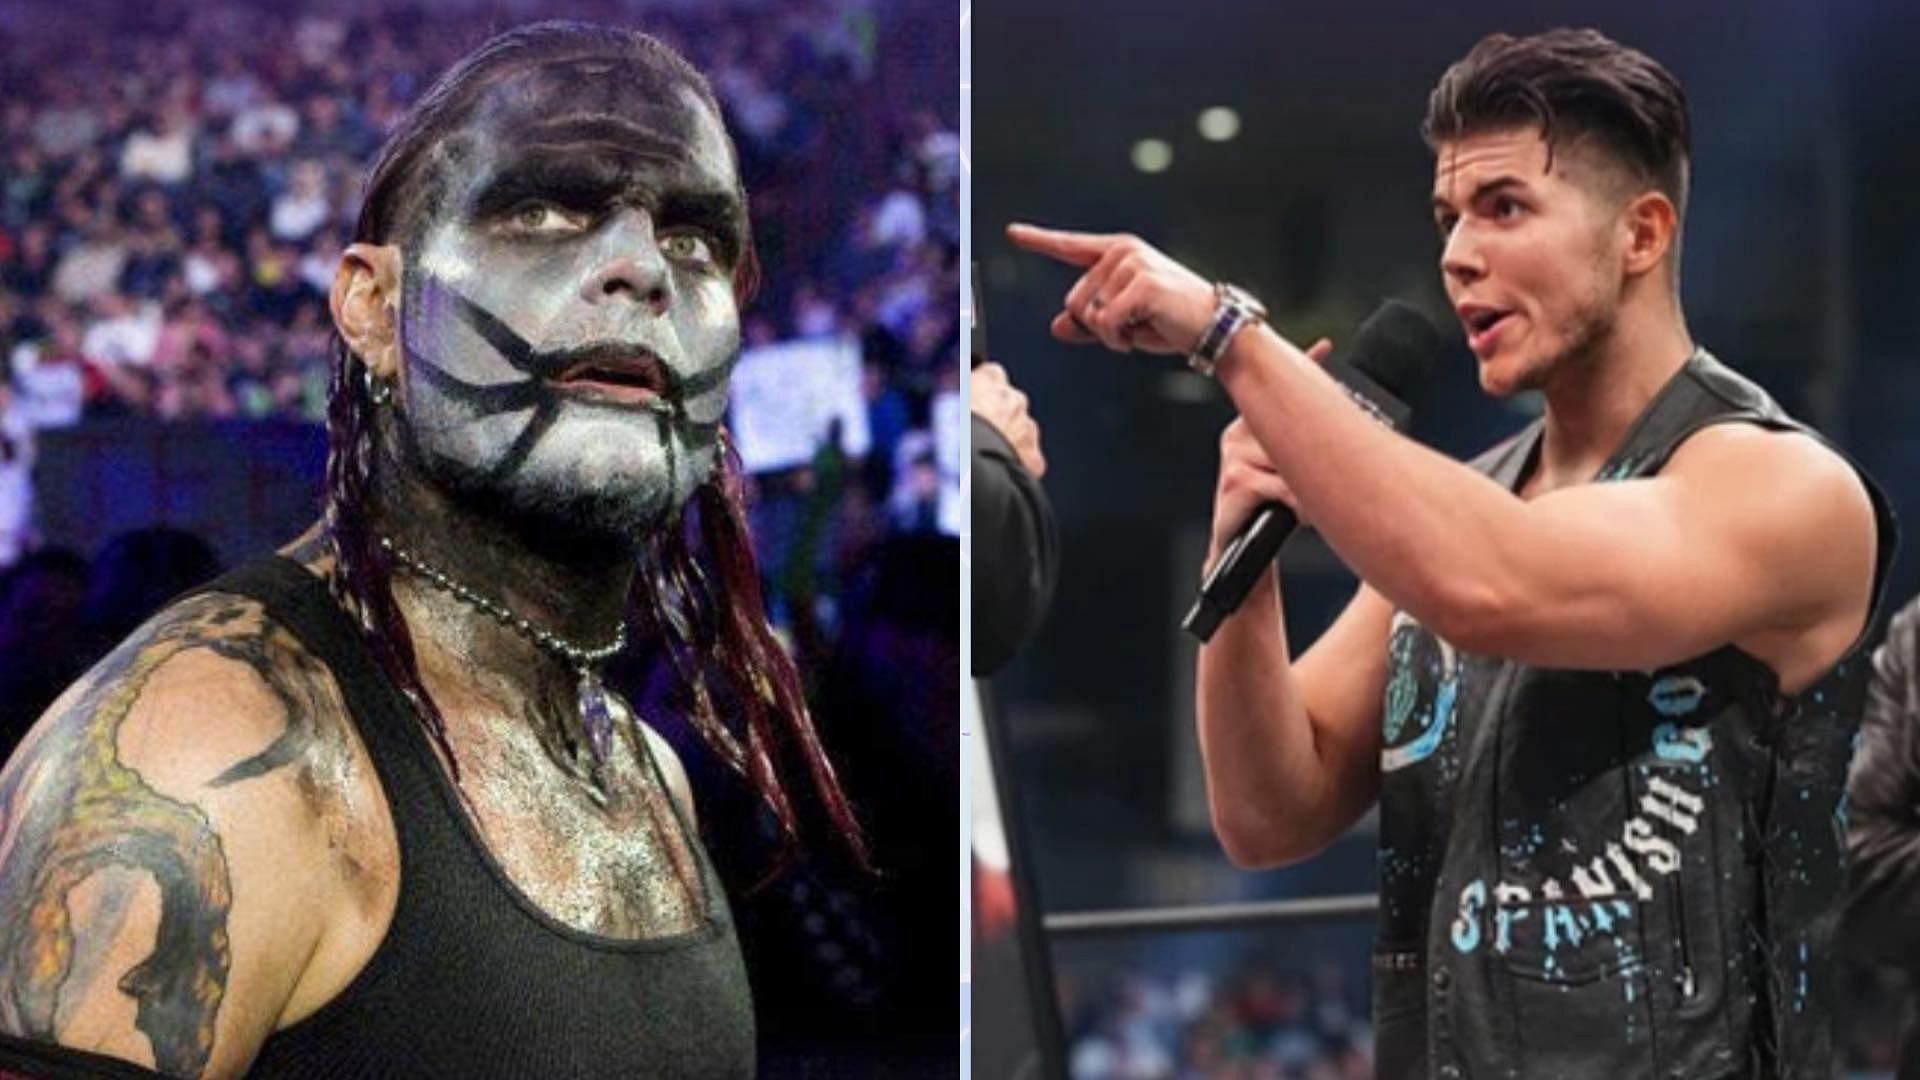 Sammy Guevara and Jeff Hardy recently faced off in AEW